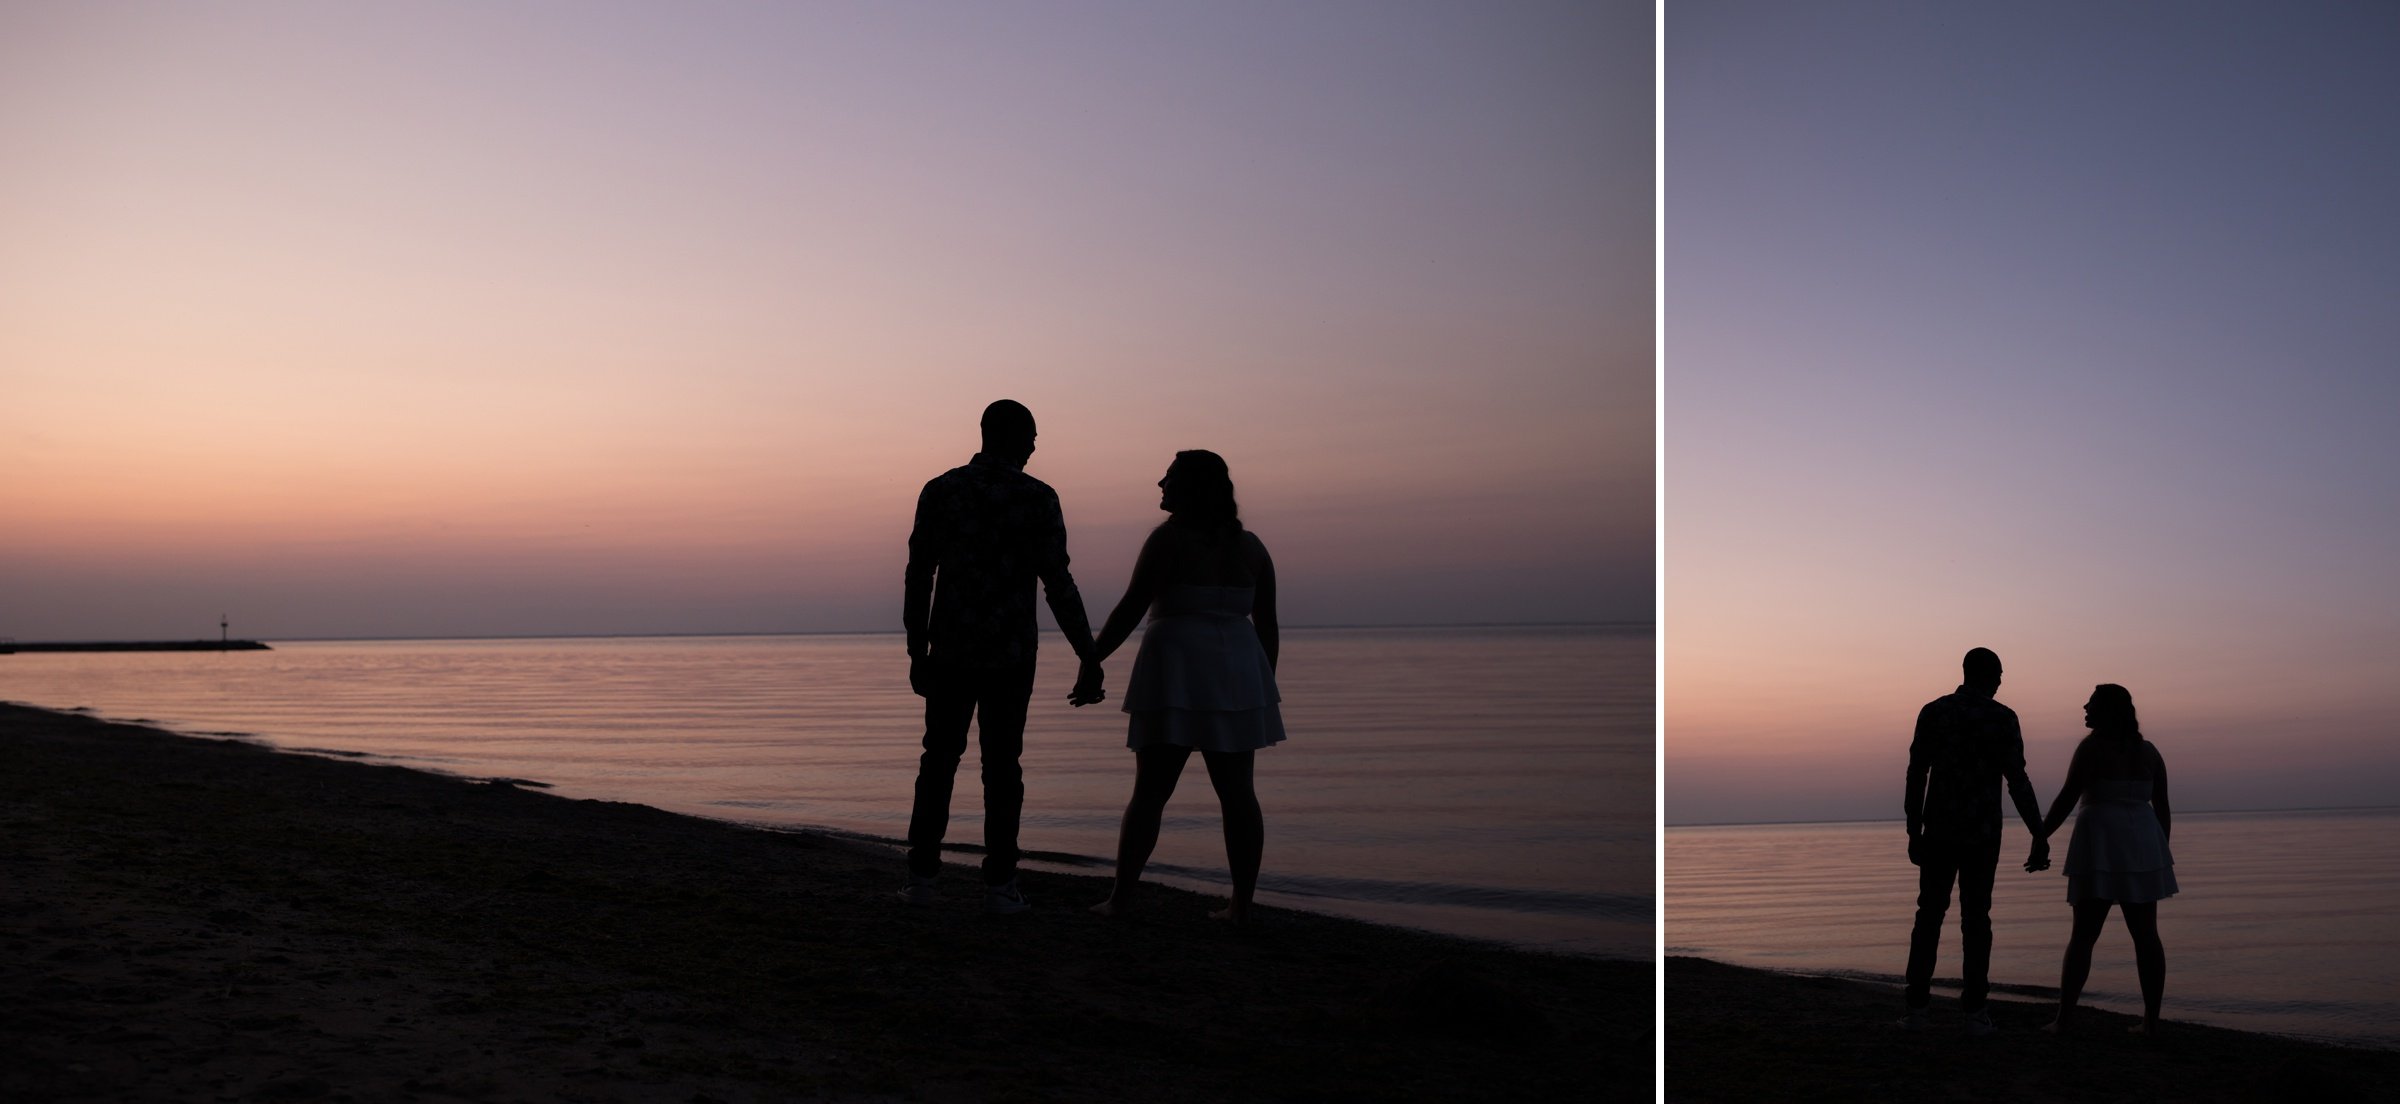 Jessica and Paul - A Sunset Bay Shore Park Engagement Session73.jpg